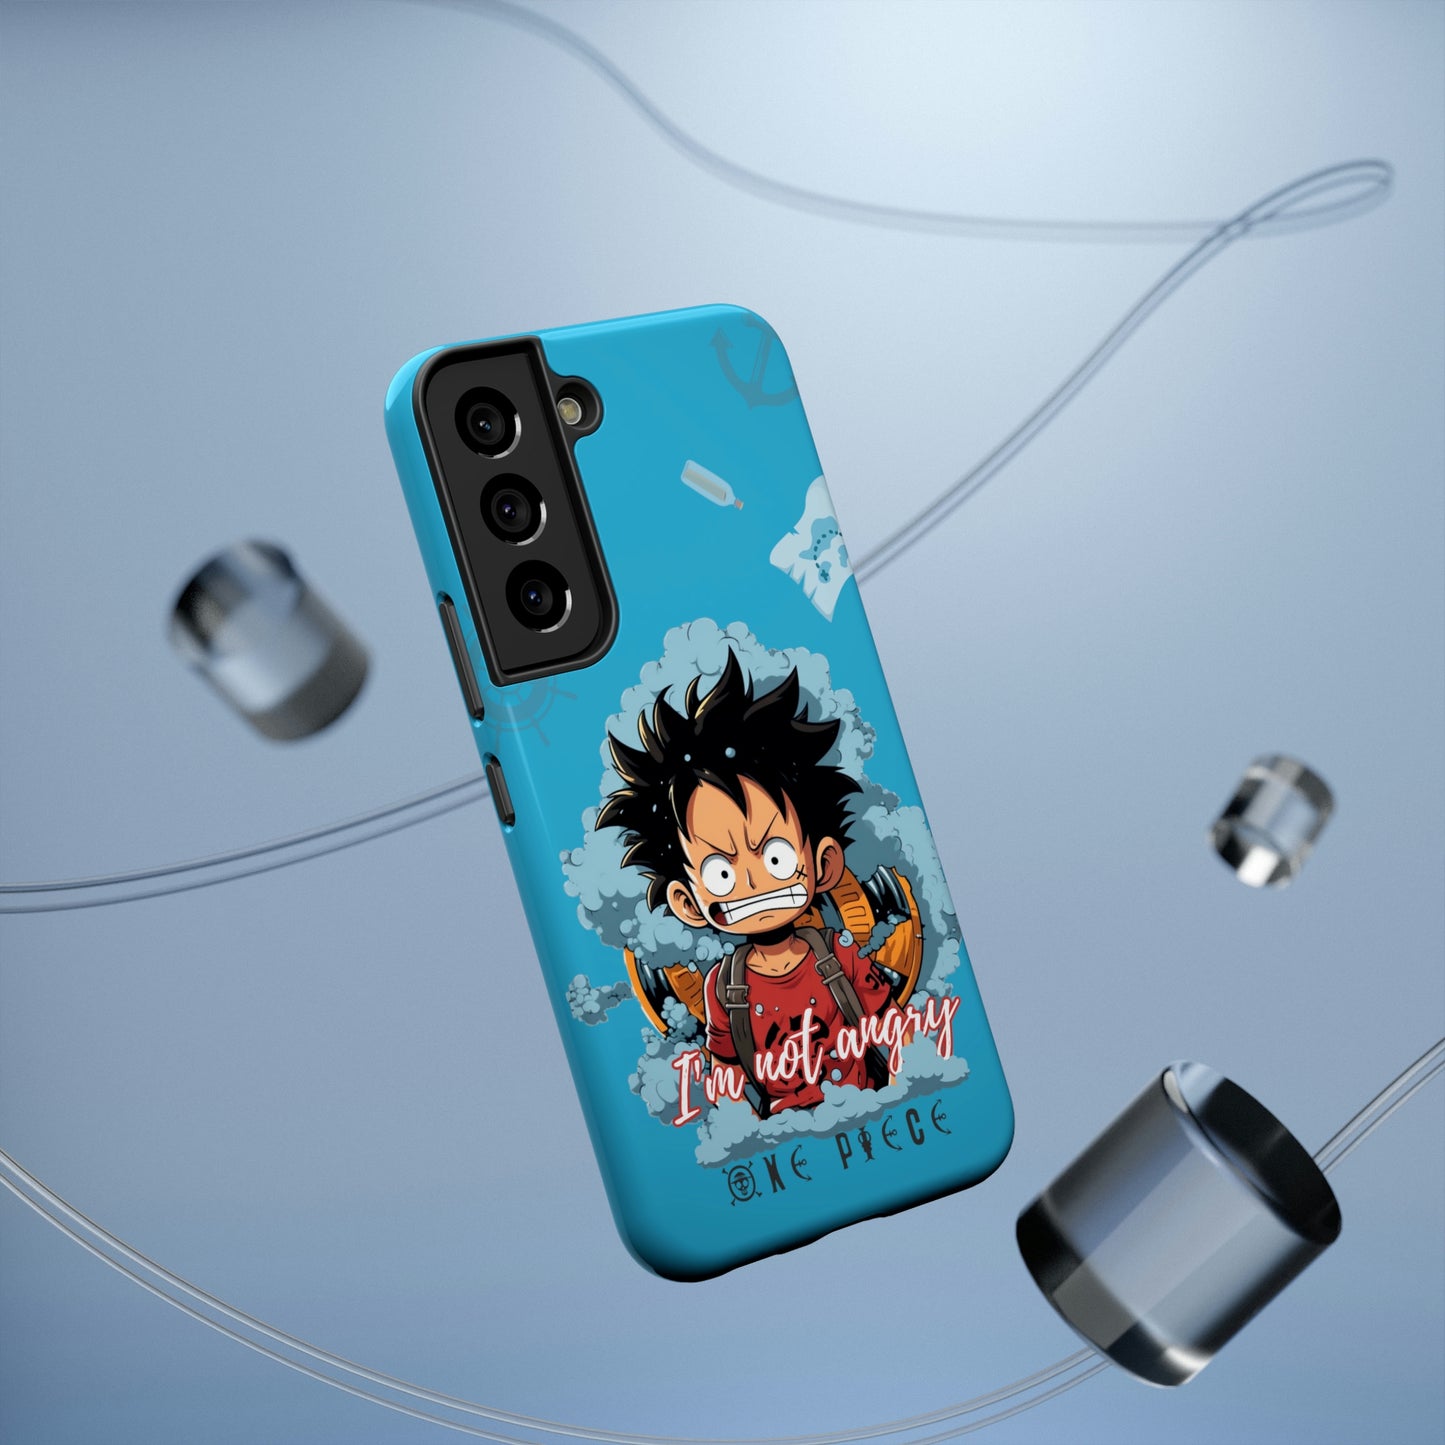 Protect your phone from damage and make a statement with our new Impact-Resistant Cases featuring Luffy's cute angry face design, because who doesn't want a phone as tough as a pirate with a rubber body?